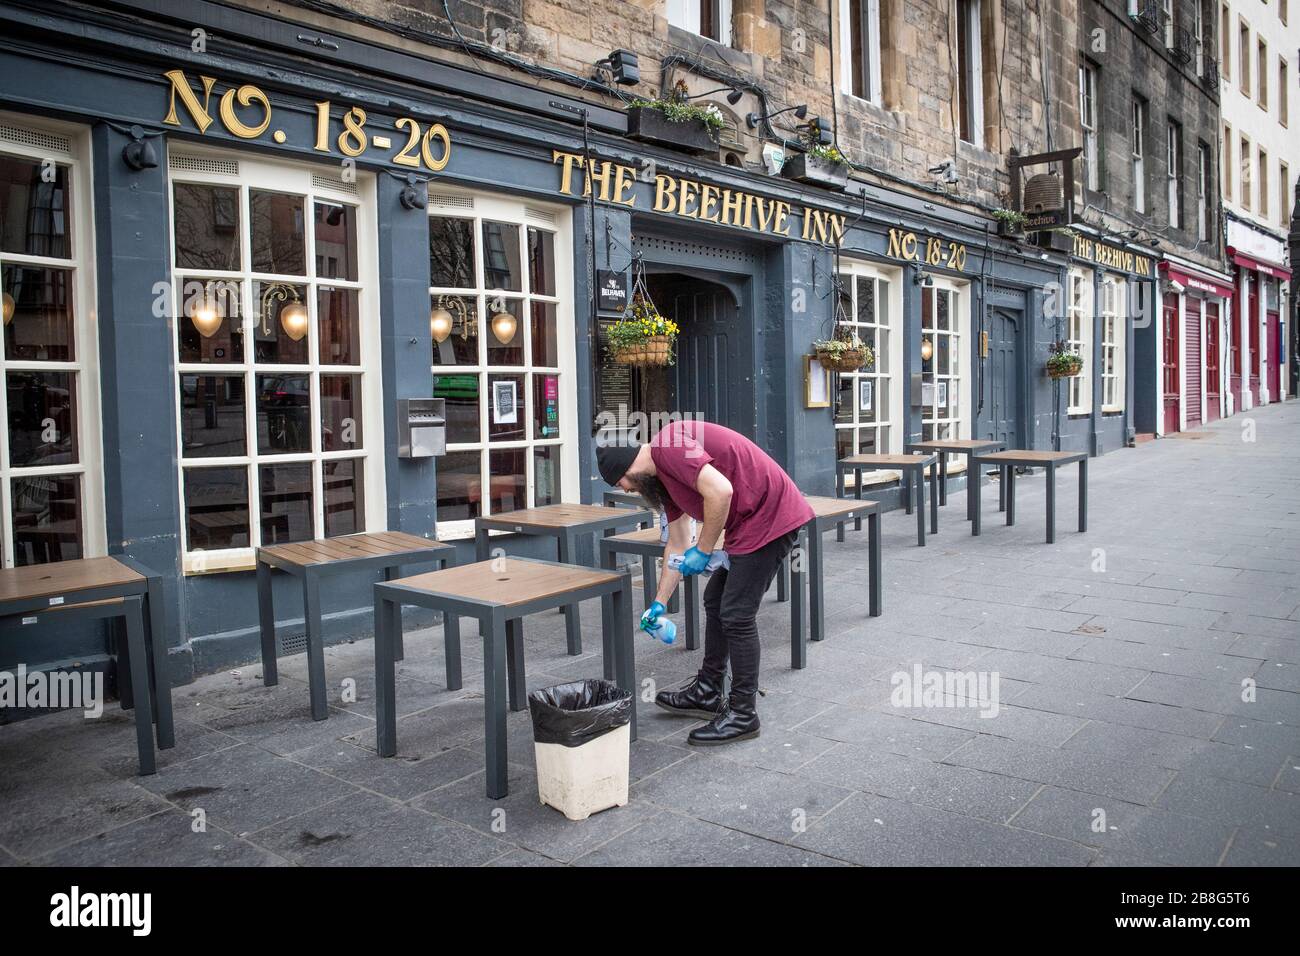 A member of staff at The Beehive Inn in the Grassmarket, Edinburgh, cleans the tables following the pub's closure due to the coronavirus outbreak. Stock Photo